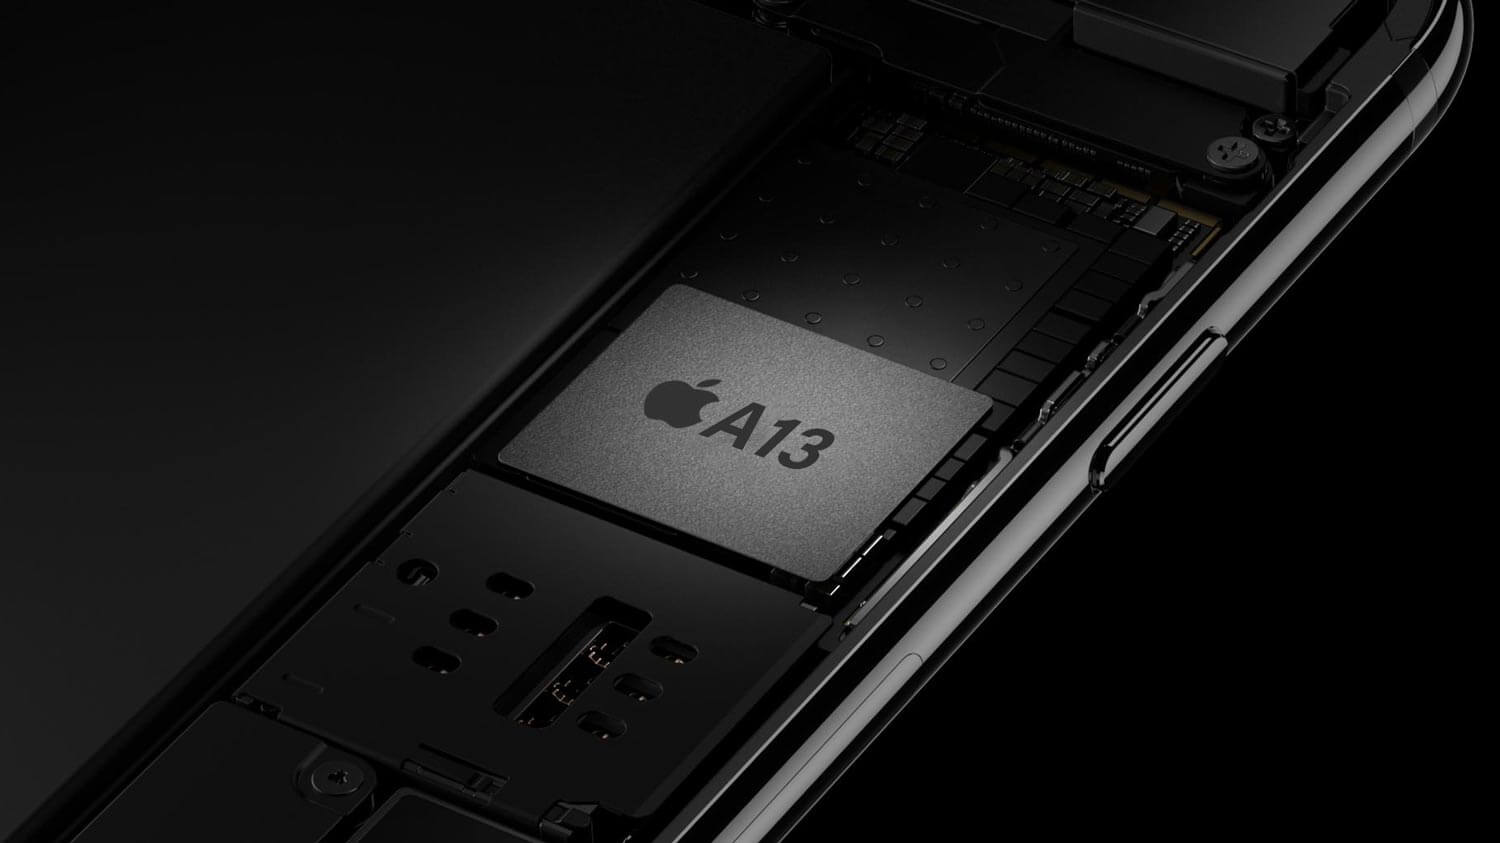 TSMC is set to be Apple's exclusive supplier for A13 chip